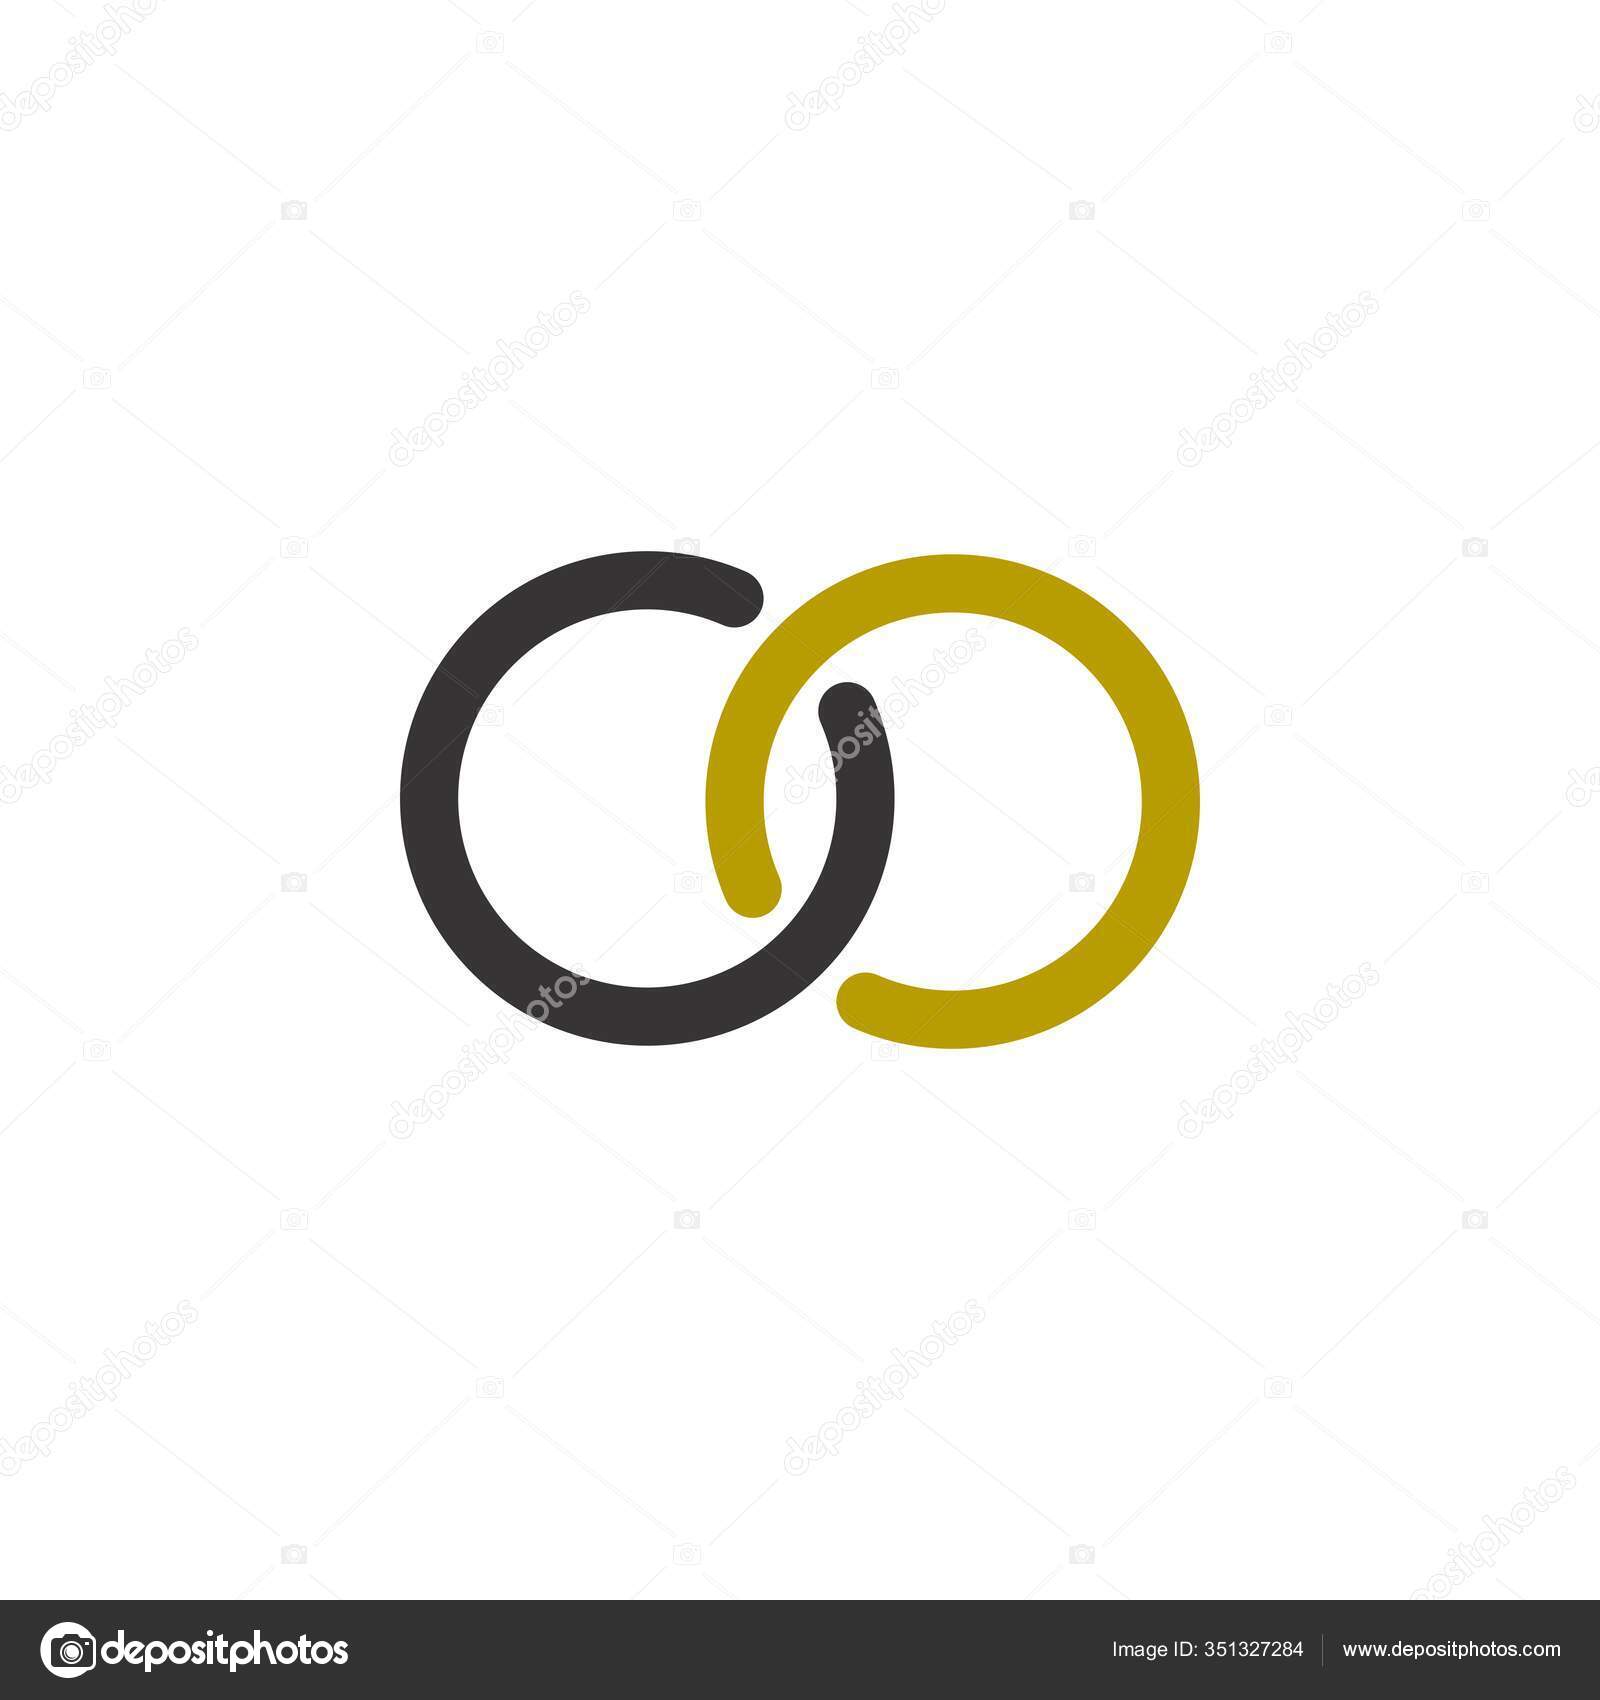 Ring Logo Vector Art PNG, Technology Orbit Web Rings Logo Design Vector Circle  Ring Logo, Com Con, Abstract, Business PNG Image For Free Download